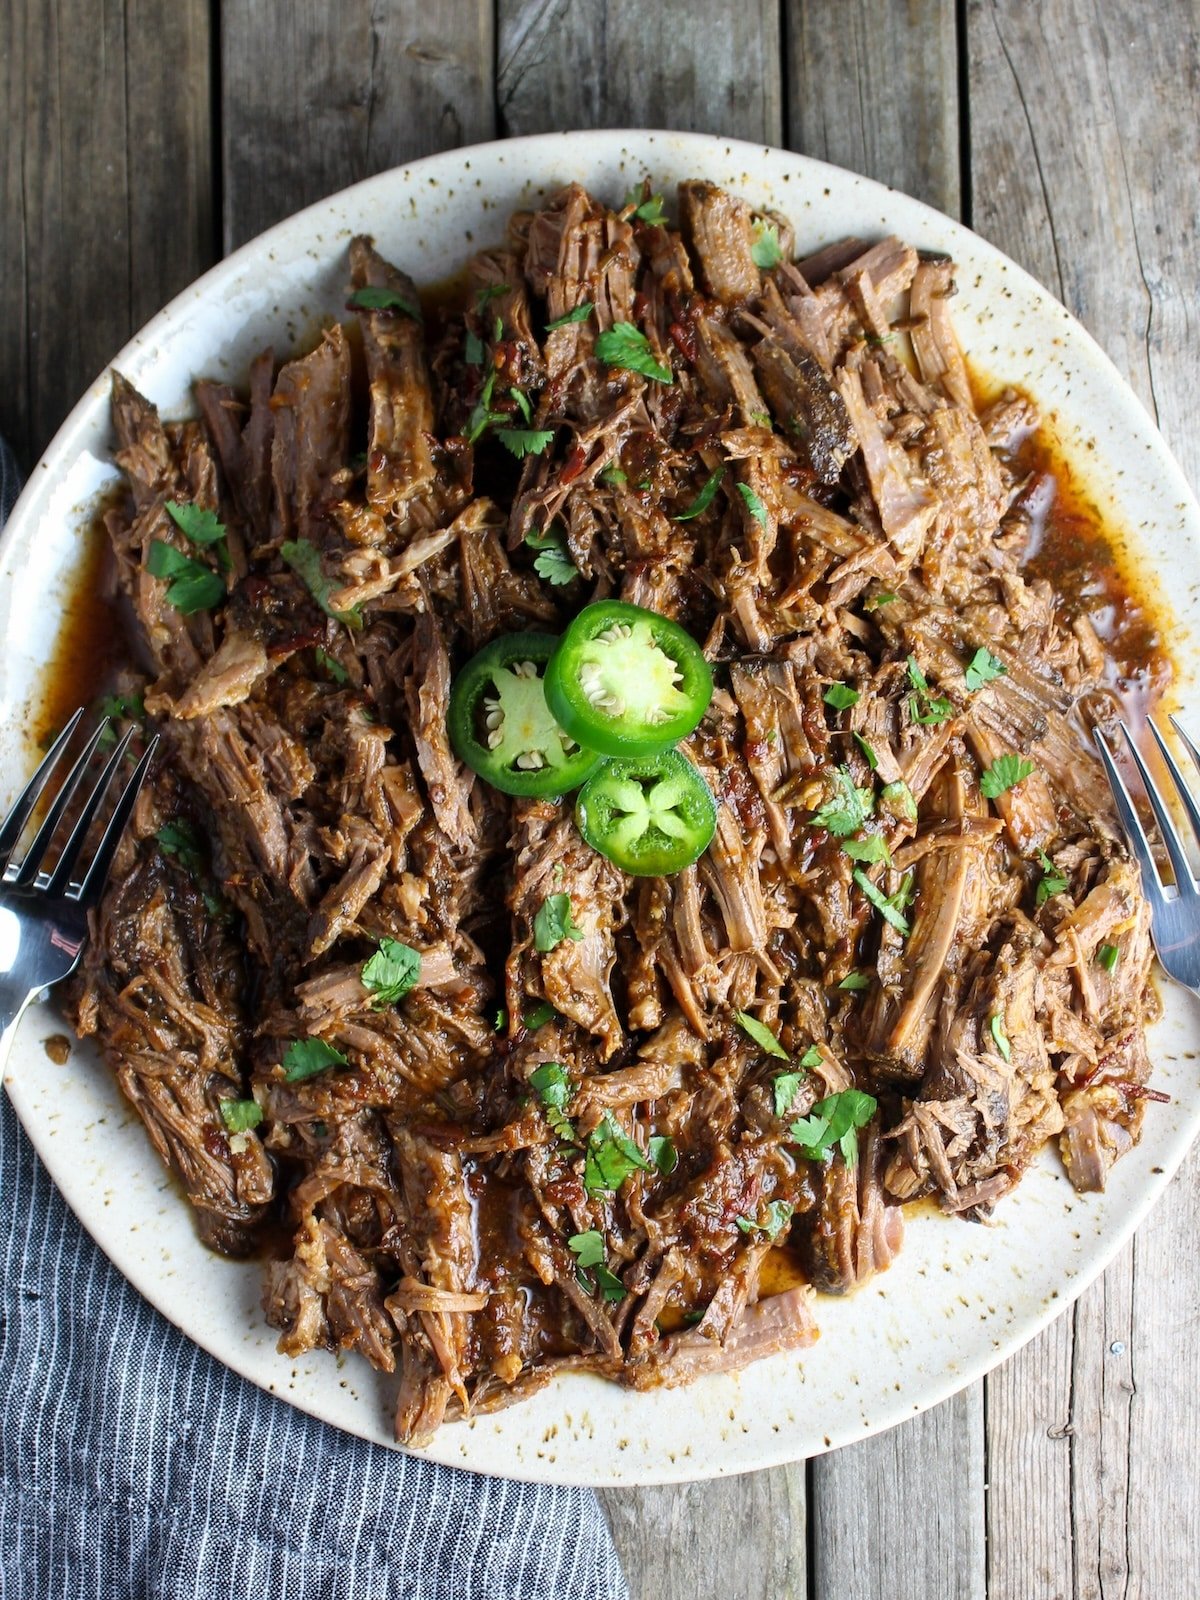 A plate with shredded beef barbacoa.